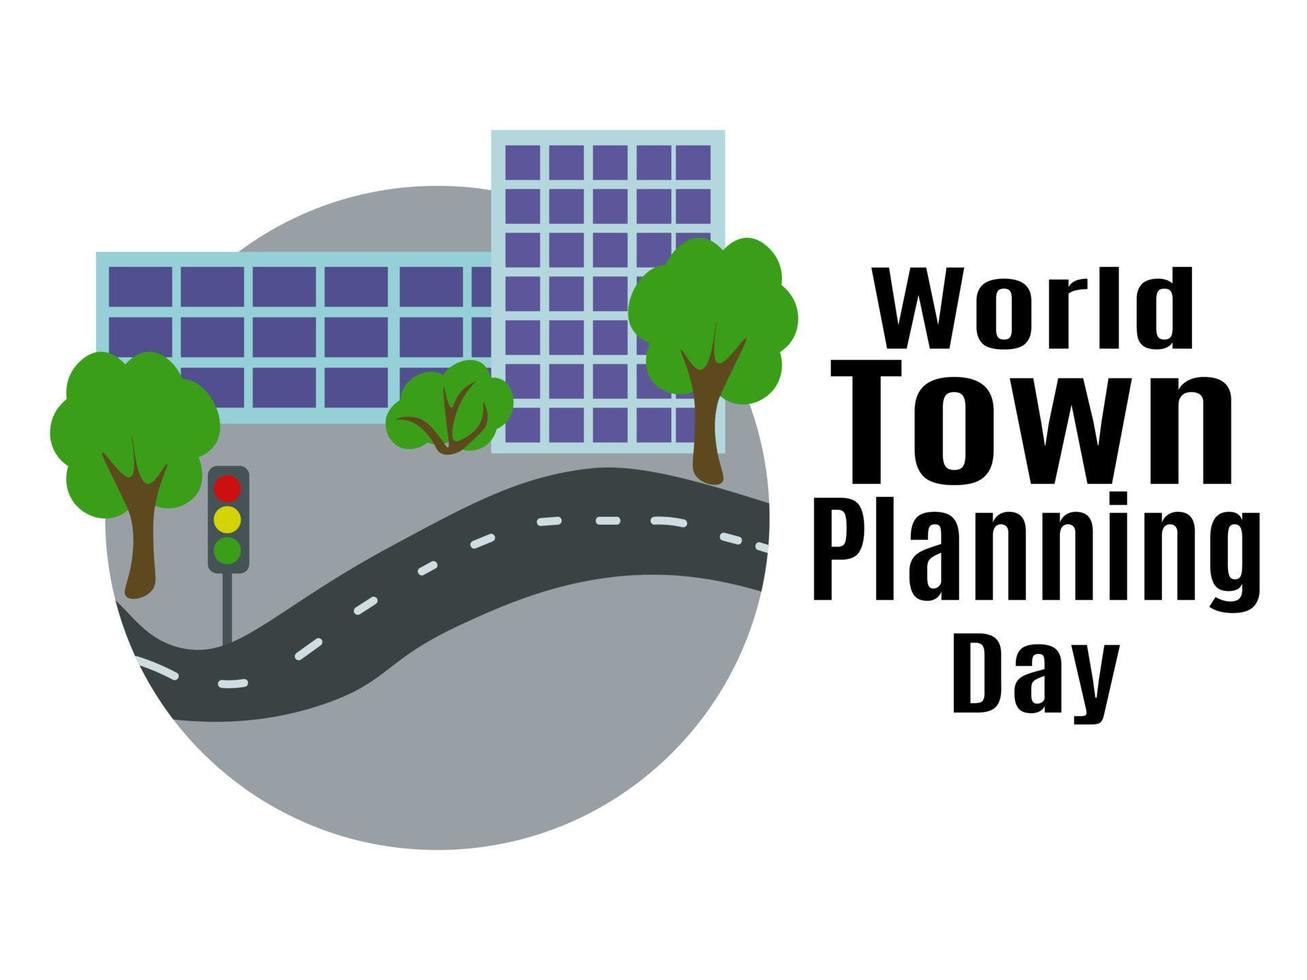 World Town Planning Day, idea for poster, banner, flyer or postcard vector